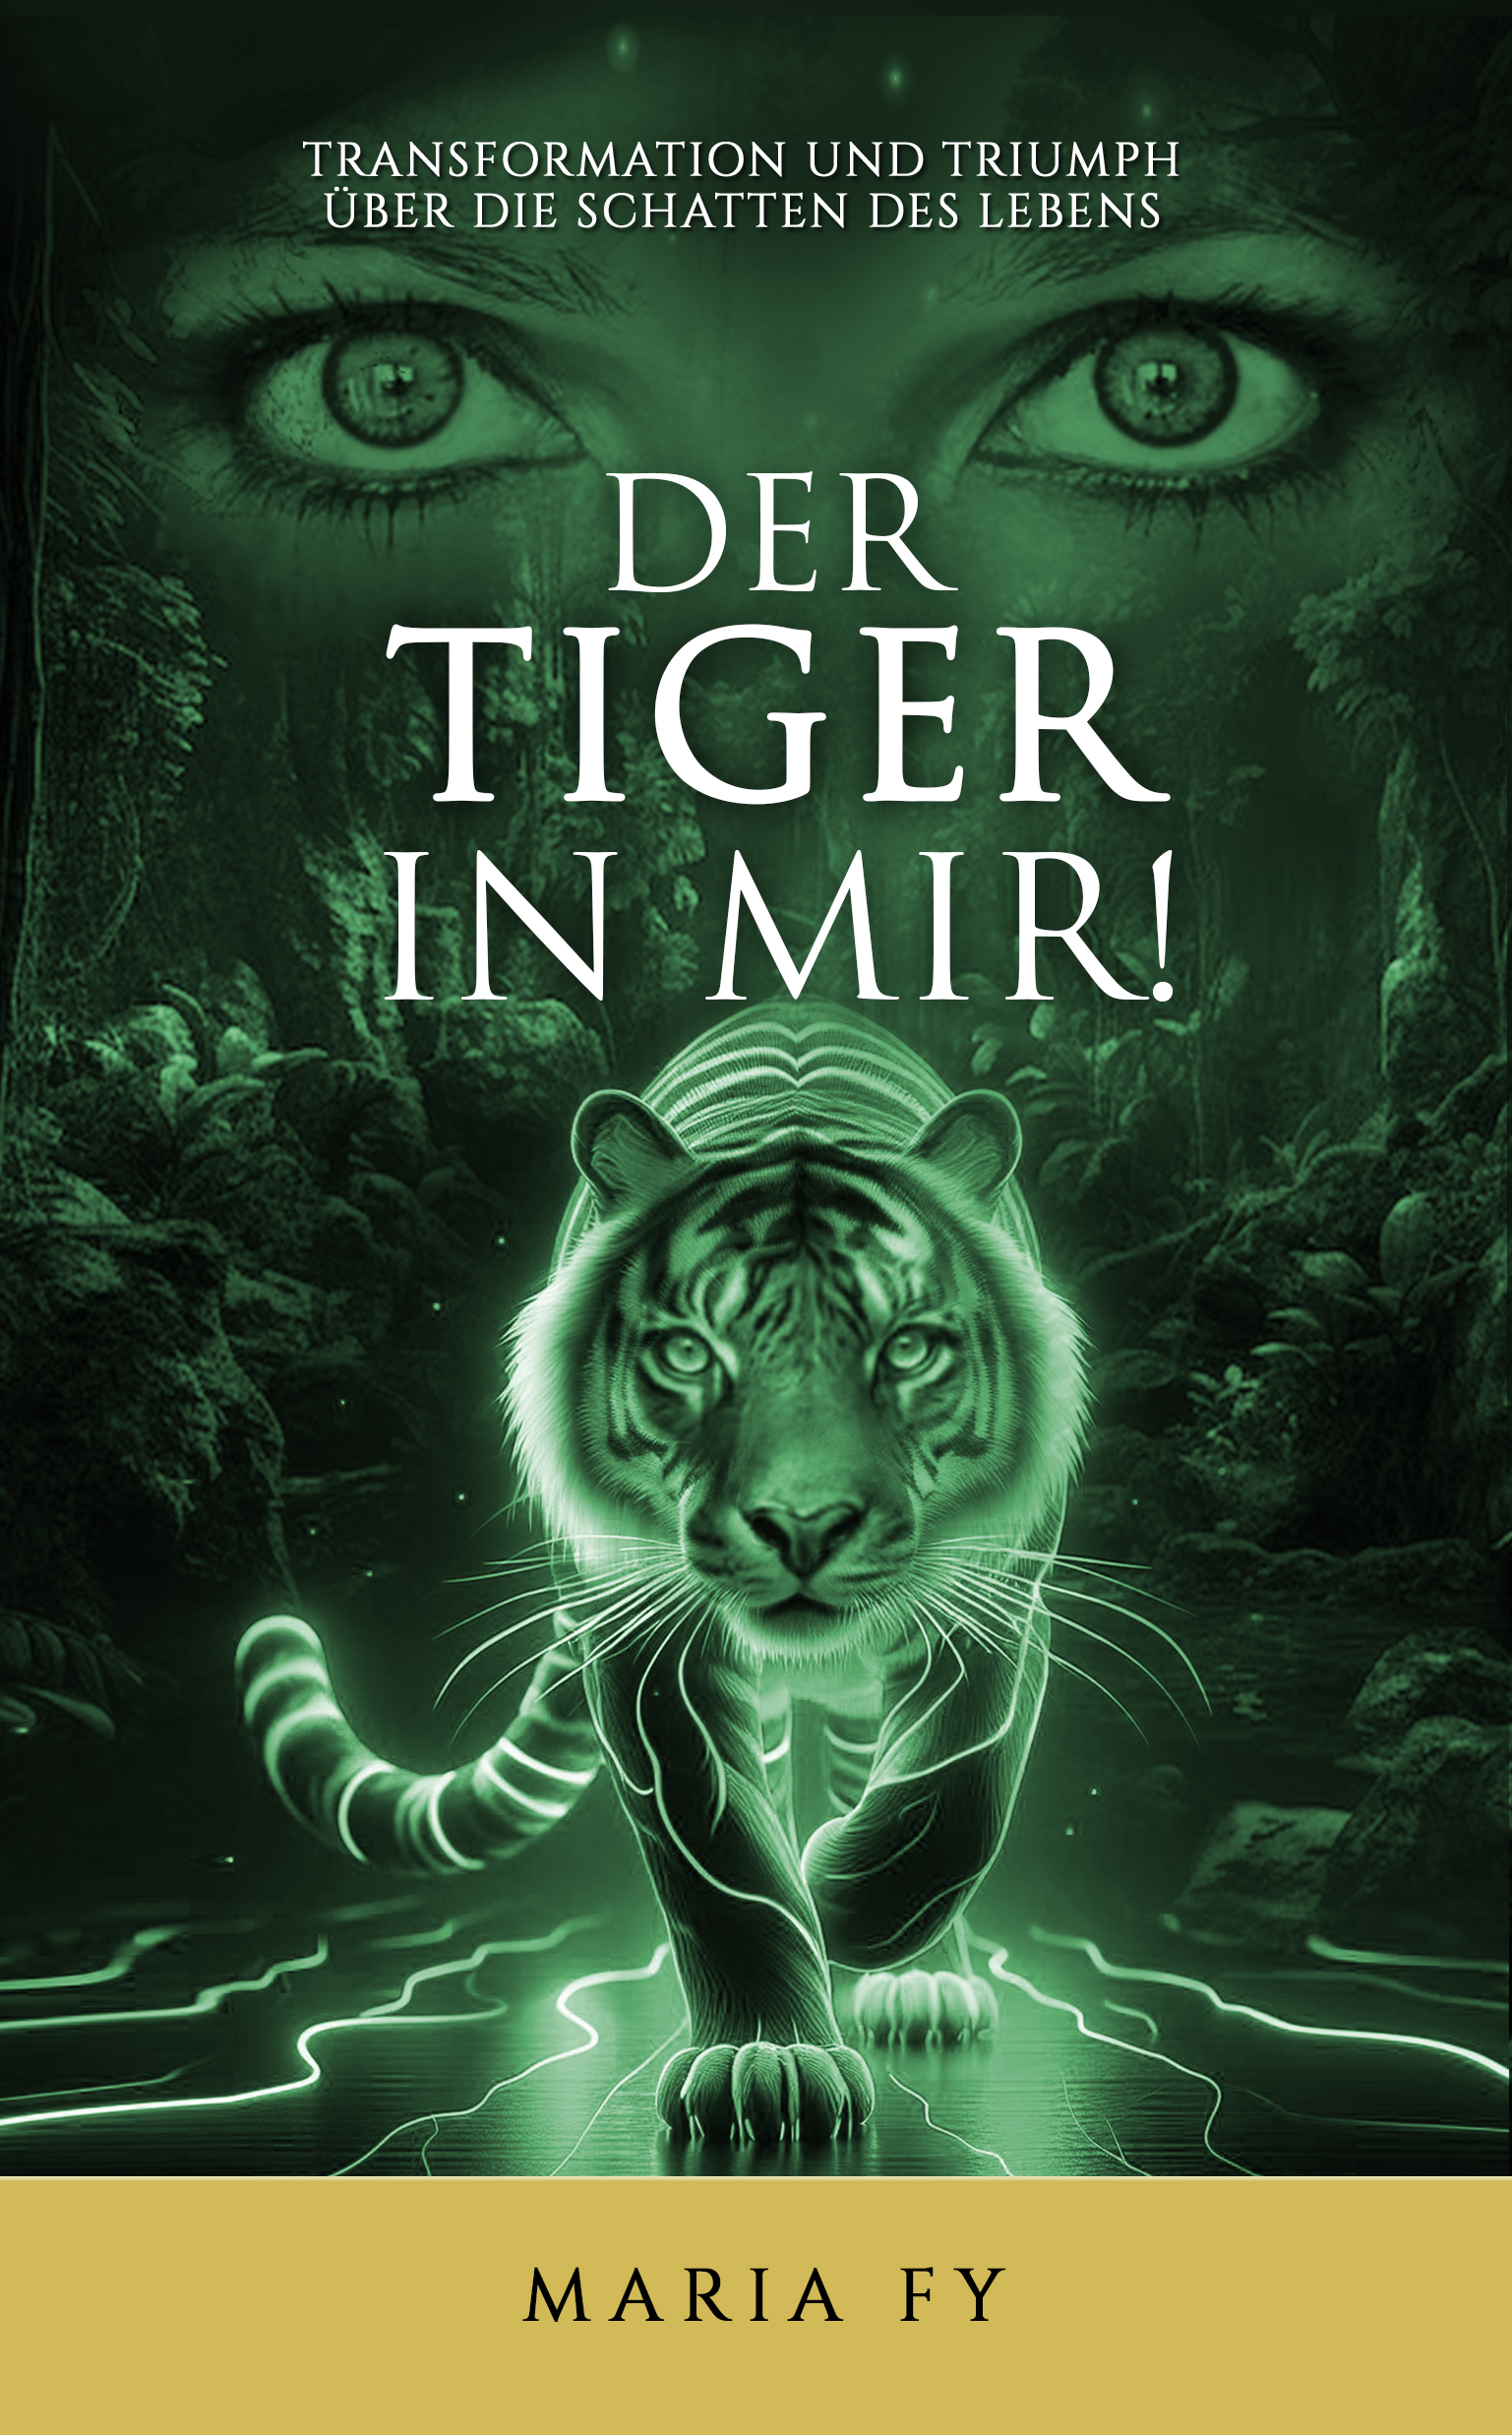 Der Tiger in mir BOOK COVER FINAL UPDATED FRONT